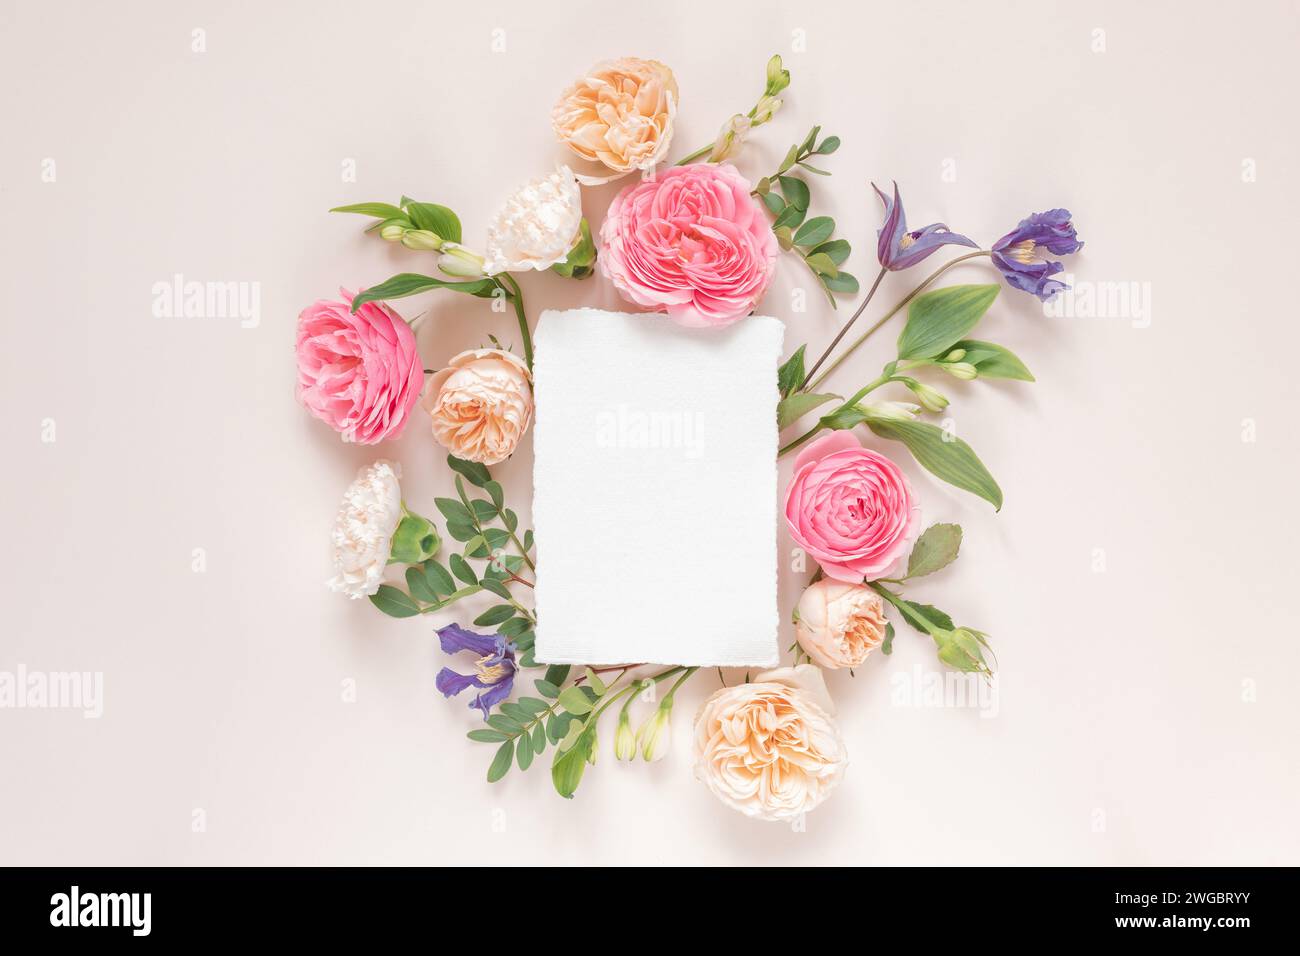 Overhead view of roses, chrysanthemums and alstroemeria flowers arranged around a blank white card Stock Photo